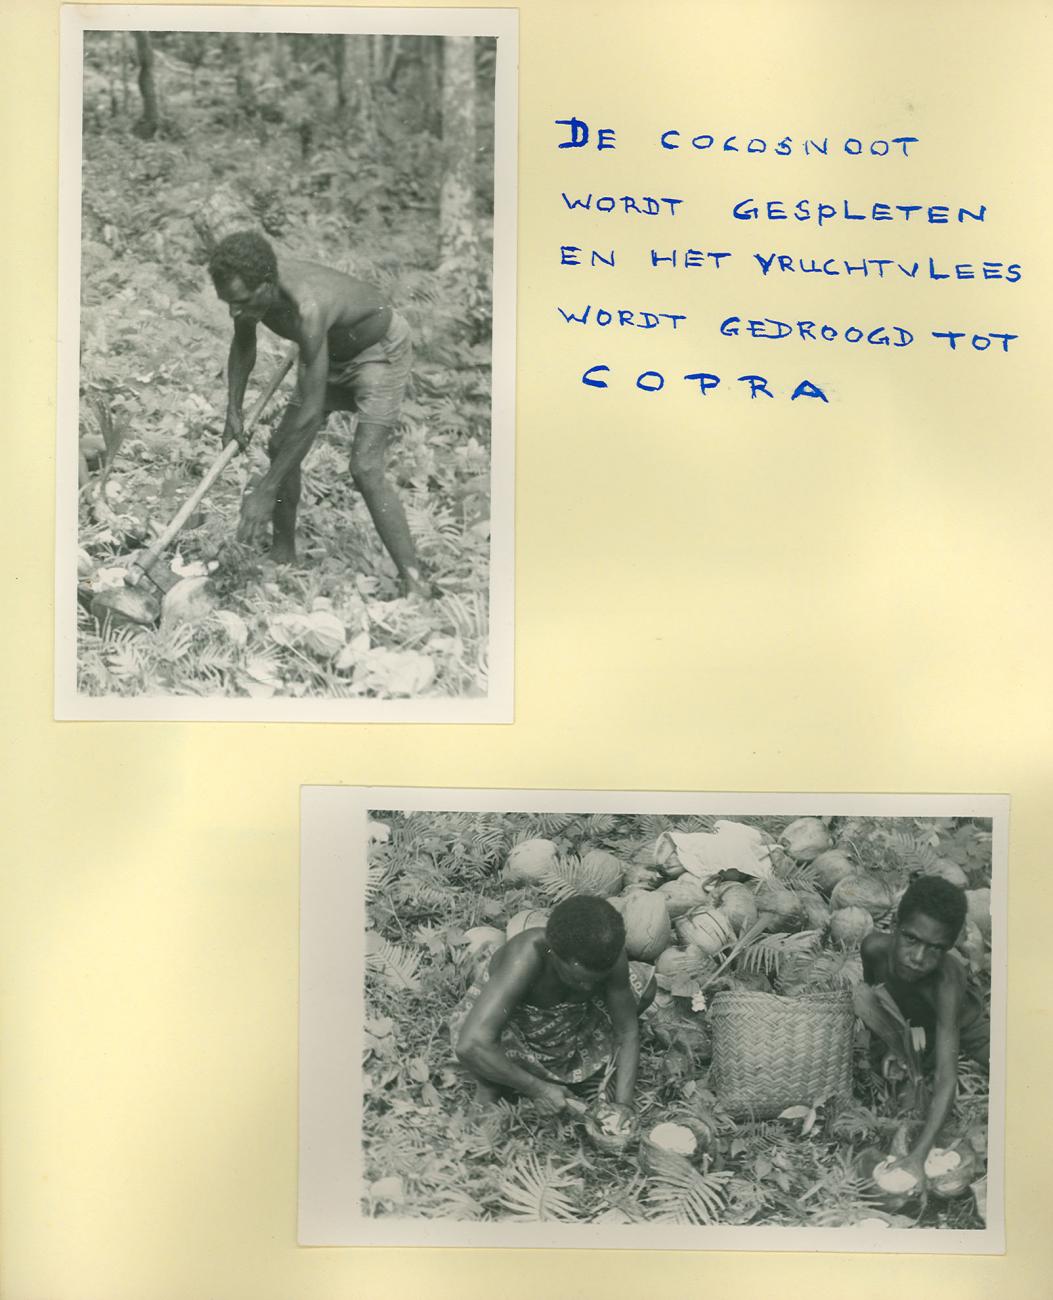 BD/83/57 - 
Division of labor at the processing of coconuts into copra
